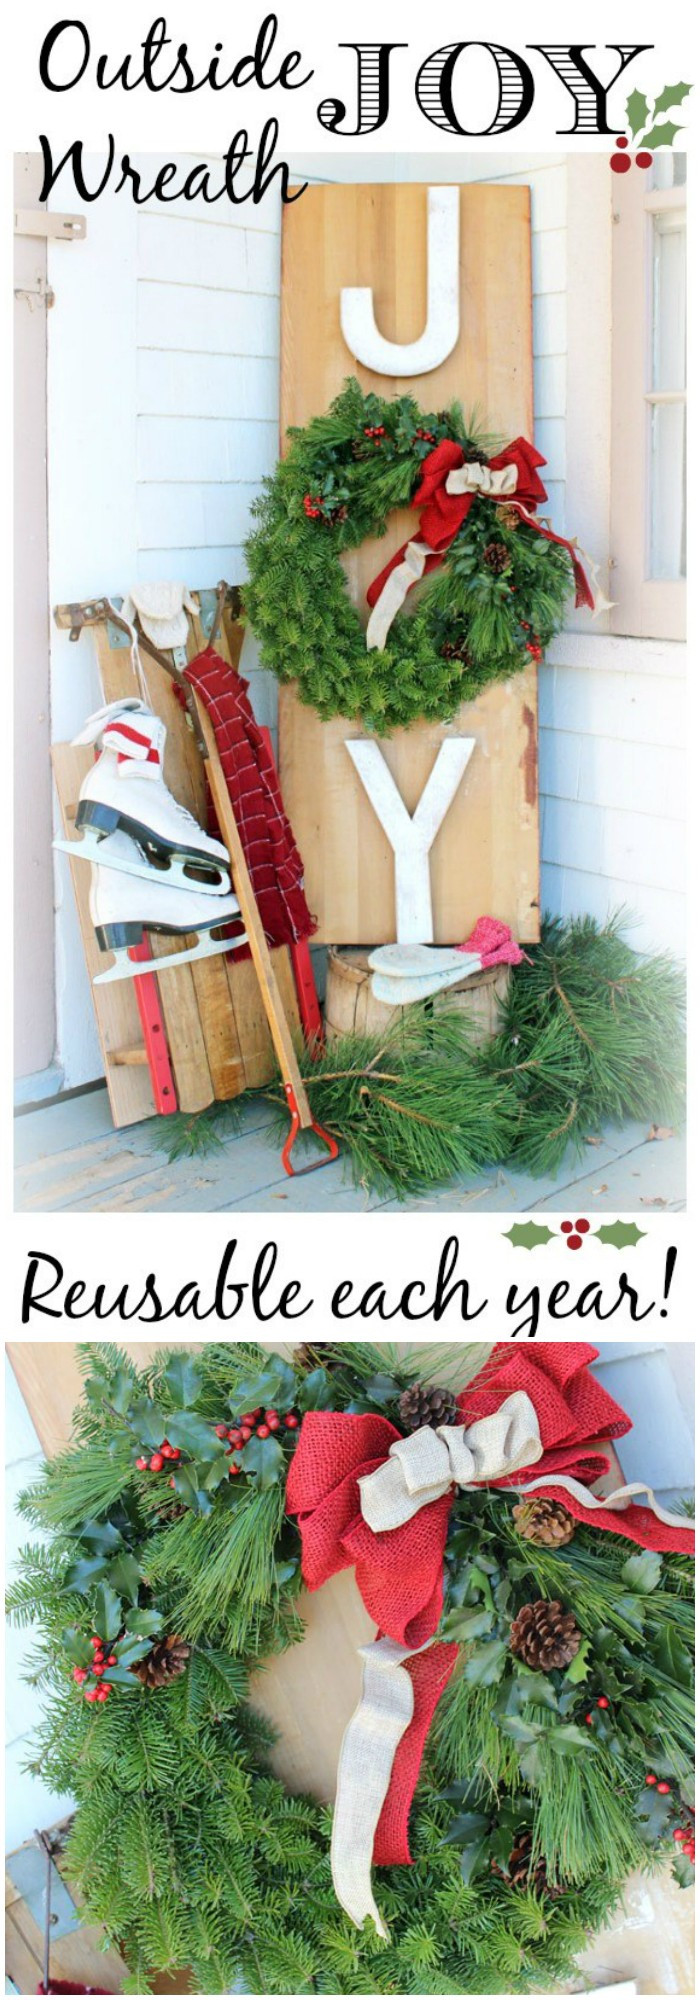 Simple Outdoor Christmas Decorations
 21 Cheap DIY Outdoor Christmas Decorations • DIY Home Decor